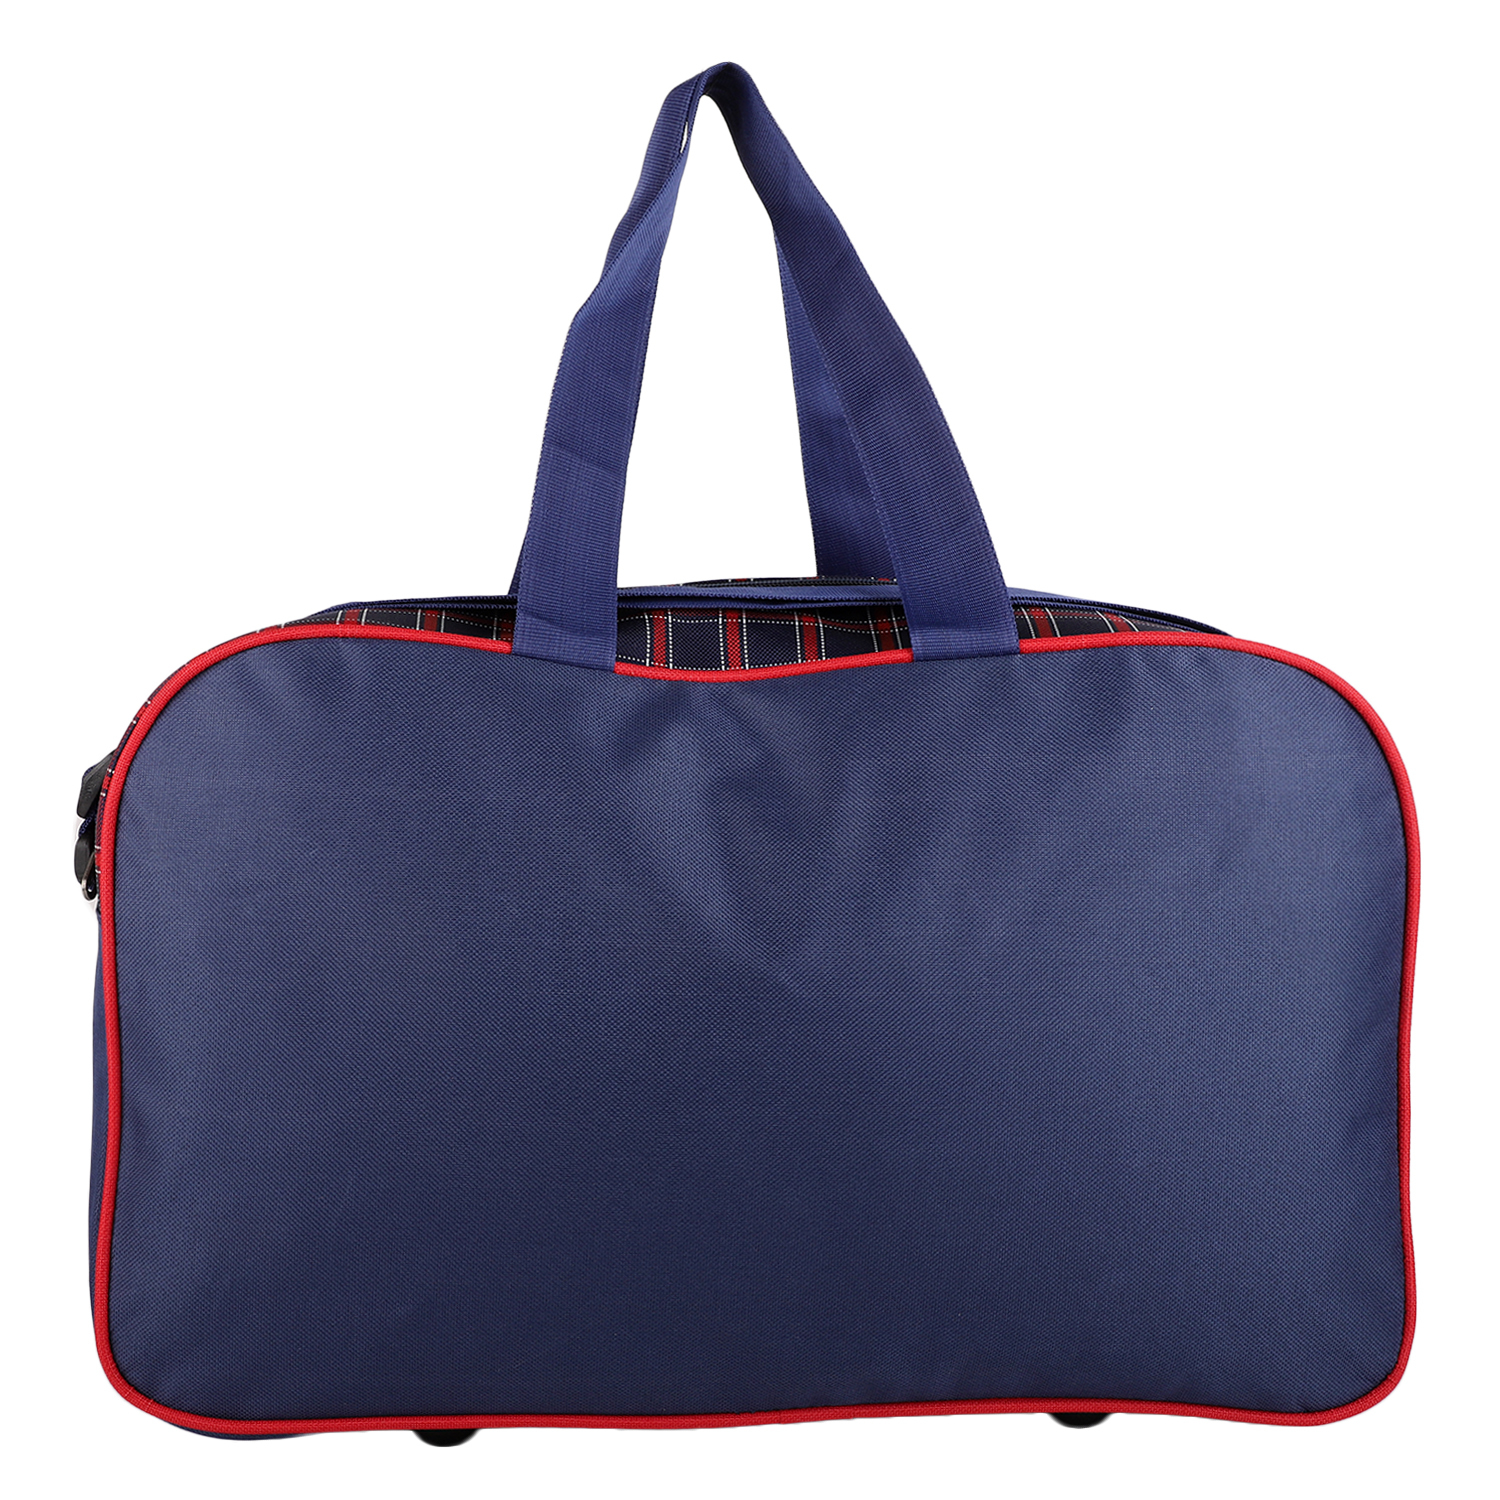 Luggage Promotional Air Bag